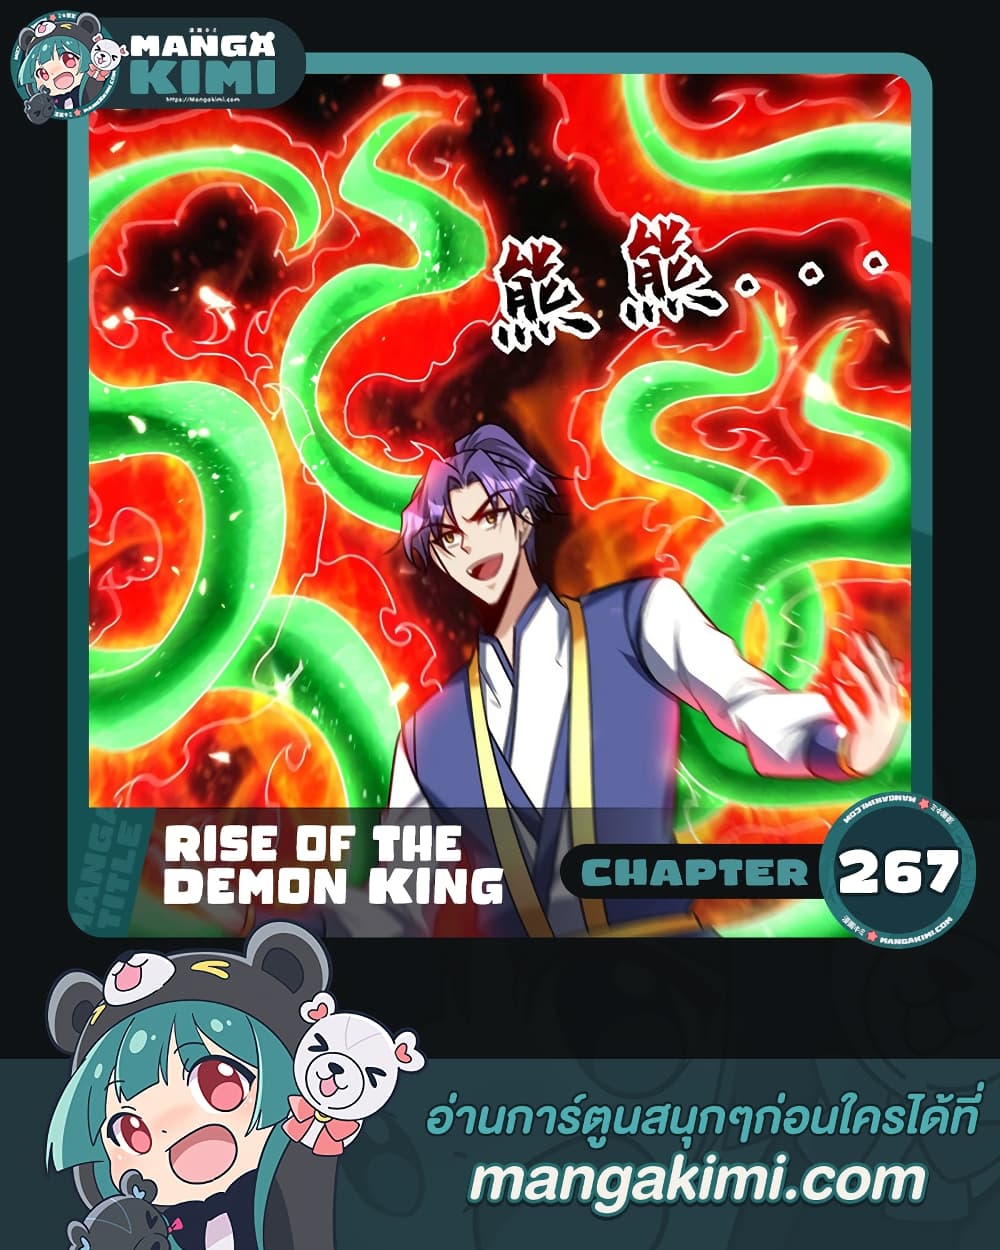 Rise of The Demon King เธฃเธธเนเธเธญเธฃเธธเธ“เนเธซเนเธเธฃเธฒเธเธฒเธเธตเธจเธฒเธ เธ•เธญเธเธ—เธตเน 267 (1)